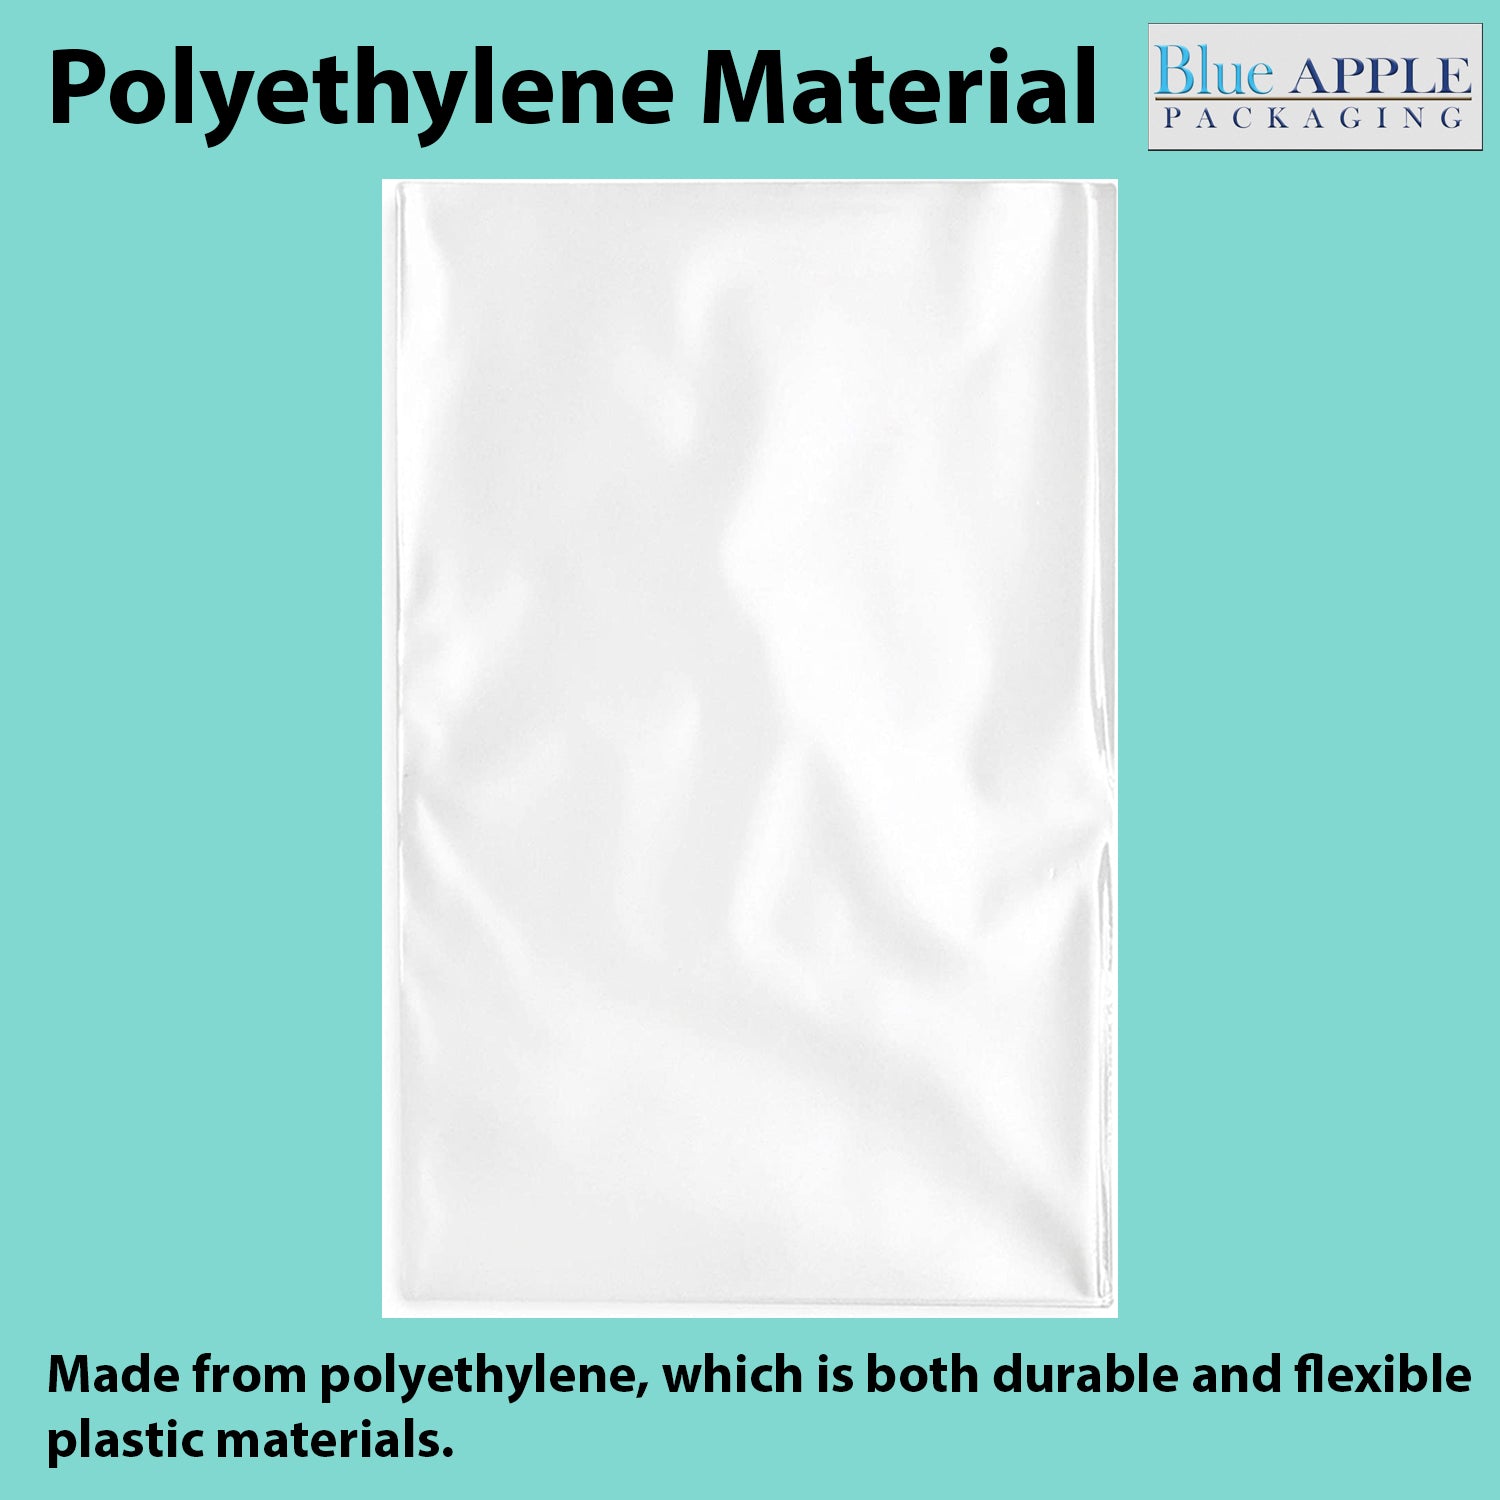 Clear Poly Bags 2Mil 12X16 Flat Open Top (LDPE)